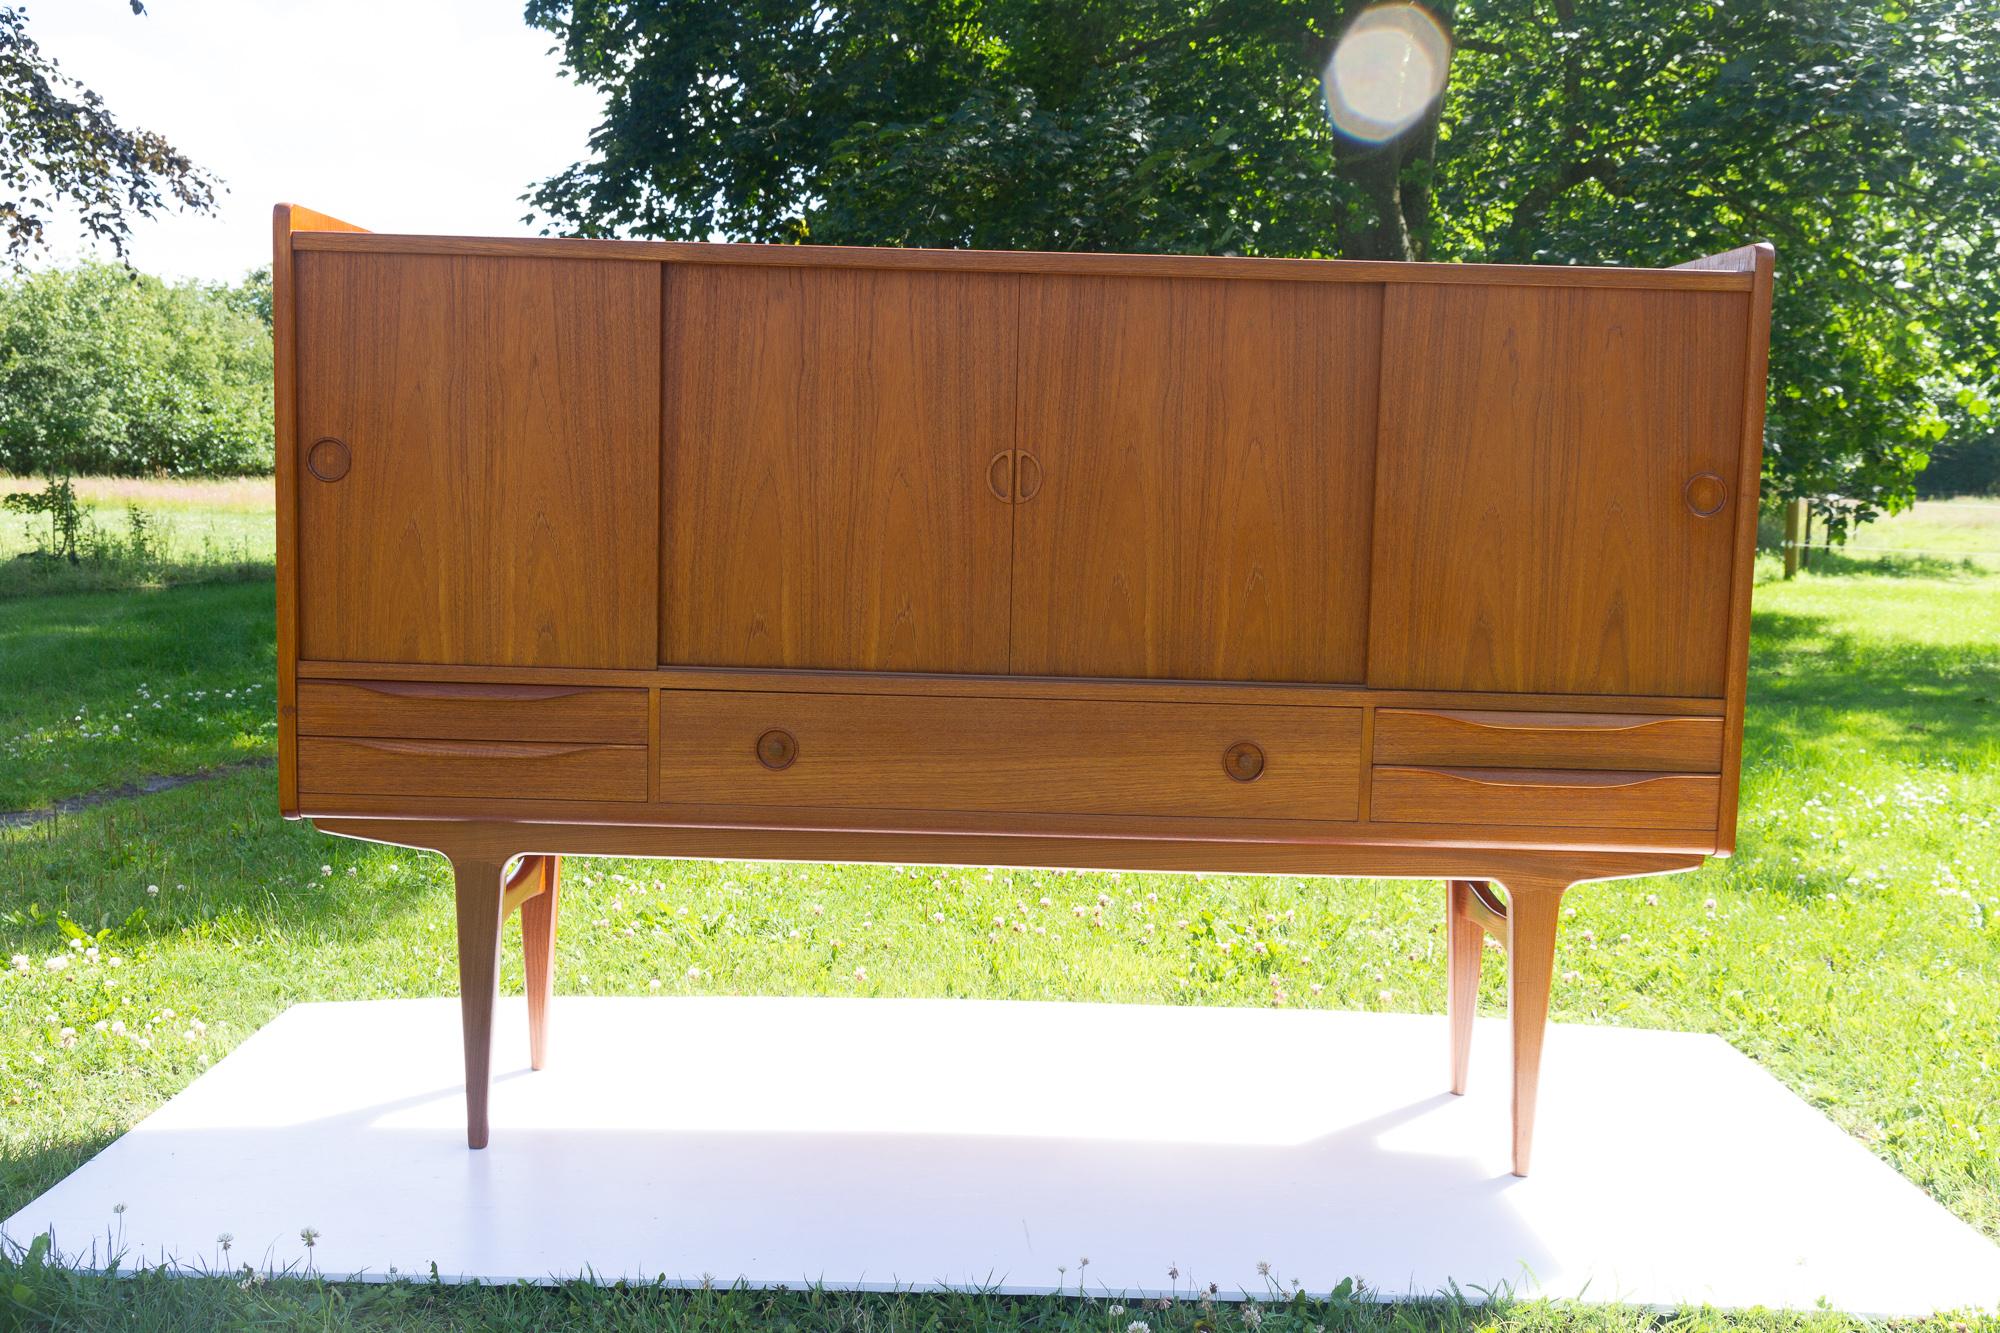 Vintage Danish teak sideboard by Johannes Andersen, 1960s
Danish modern highboard attributed to Danish architect Johannes Andersen and manufactured by Uldum Møbelfabrik, Denmark.
Behind four sliding doors are two compartments with height